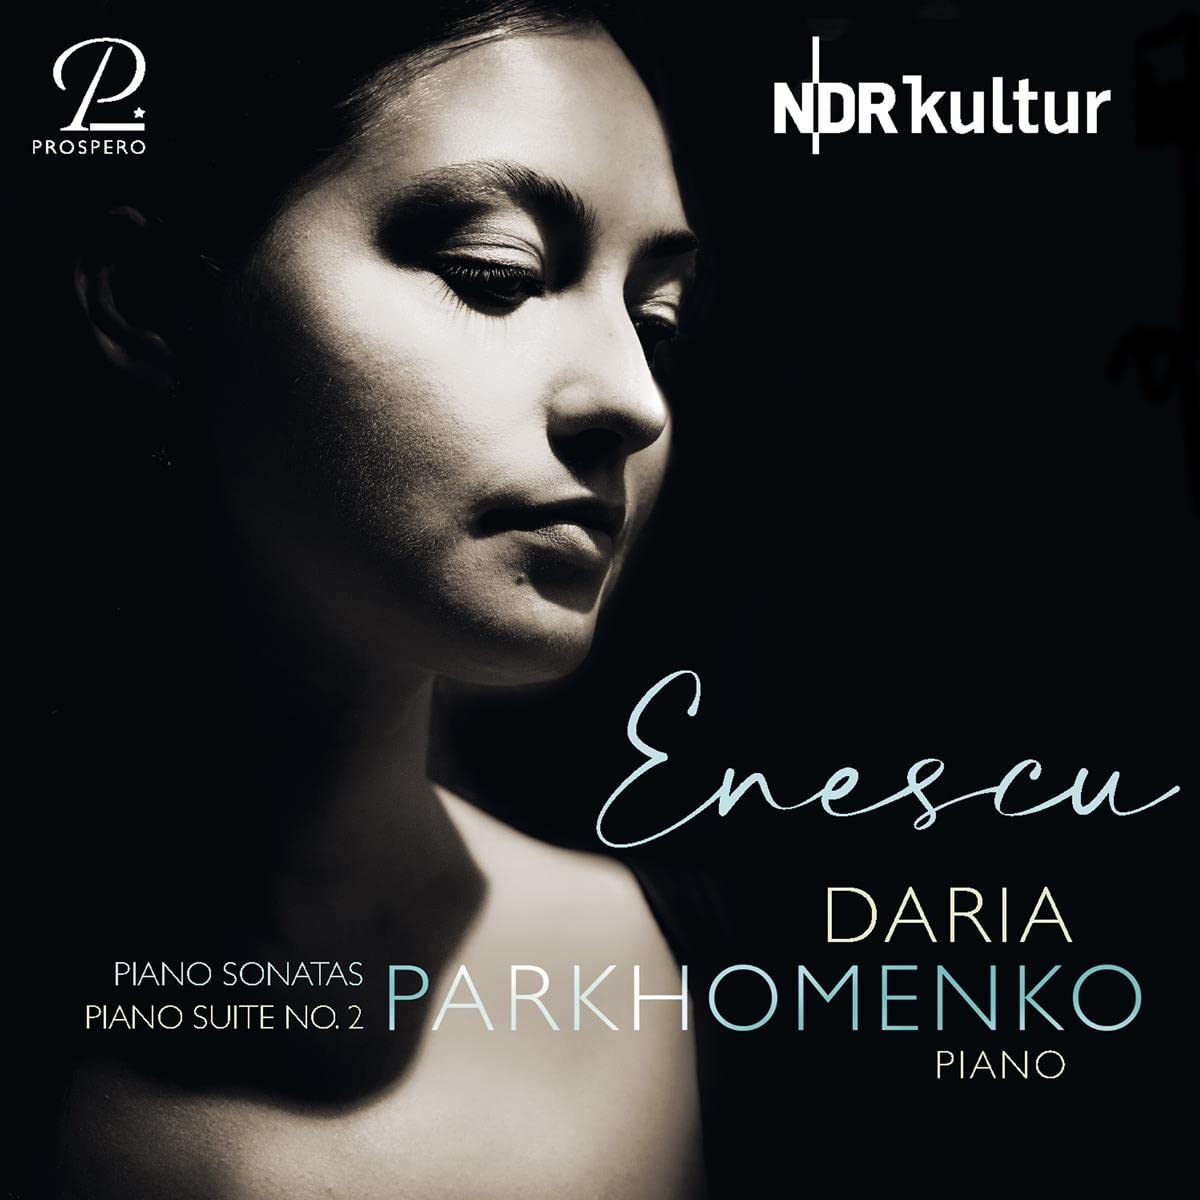 The compact disc with works by George Enescu launched by Daria Parkhomenko,  winner of the Piano Section of the 2018 edition of the Enescu Competition,  garners attention from the international press